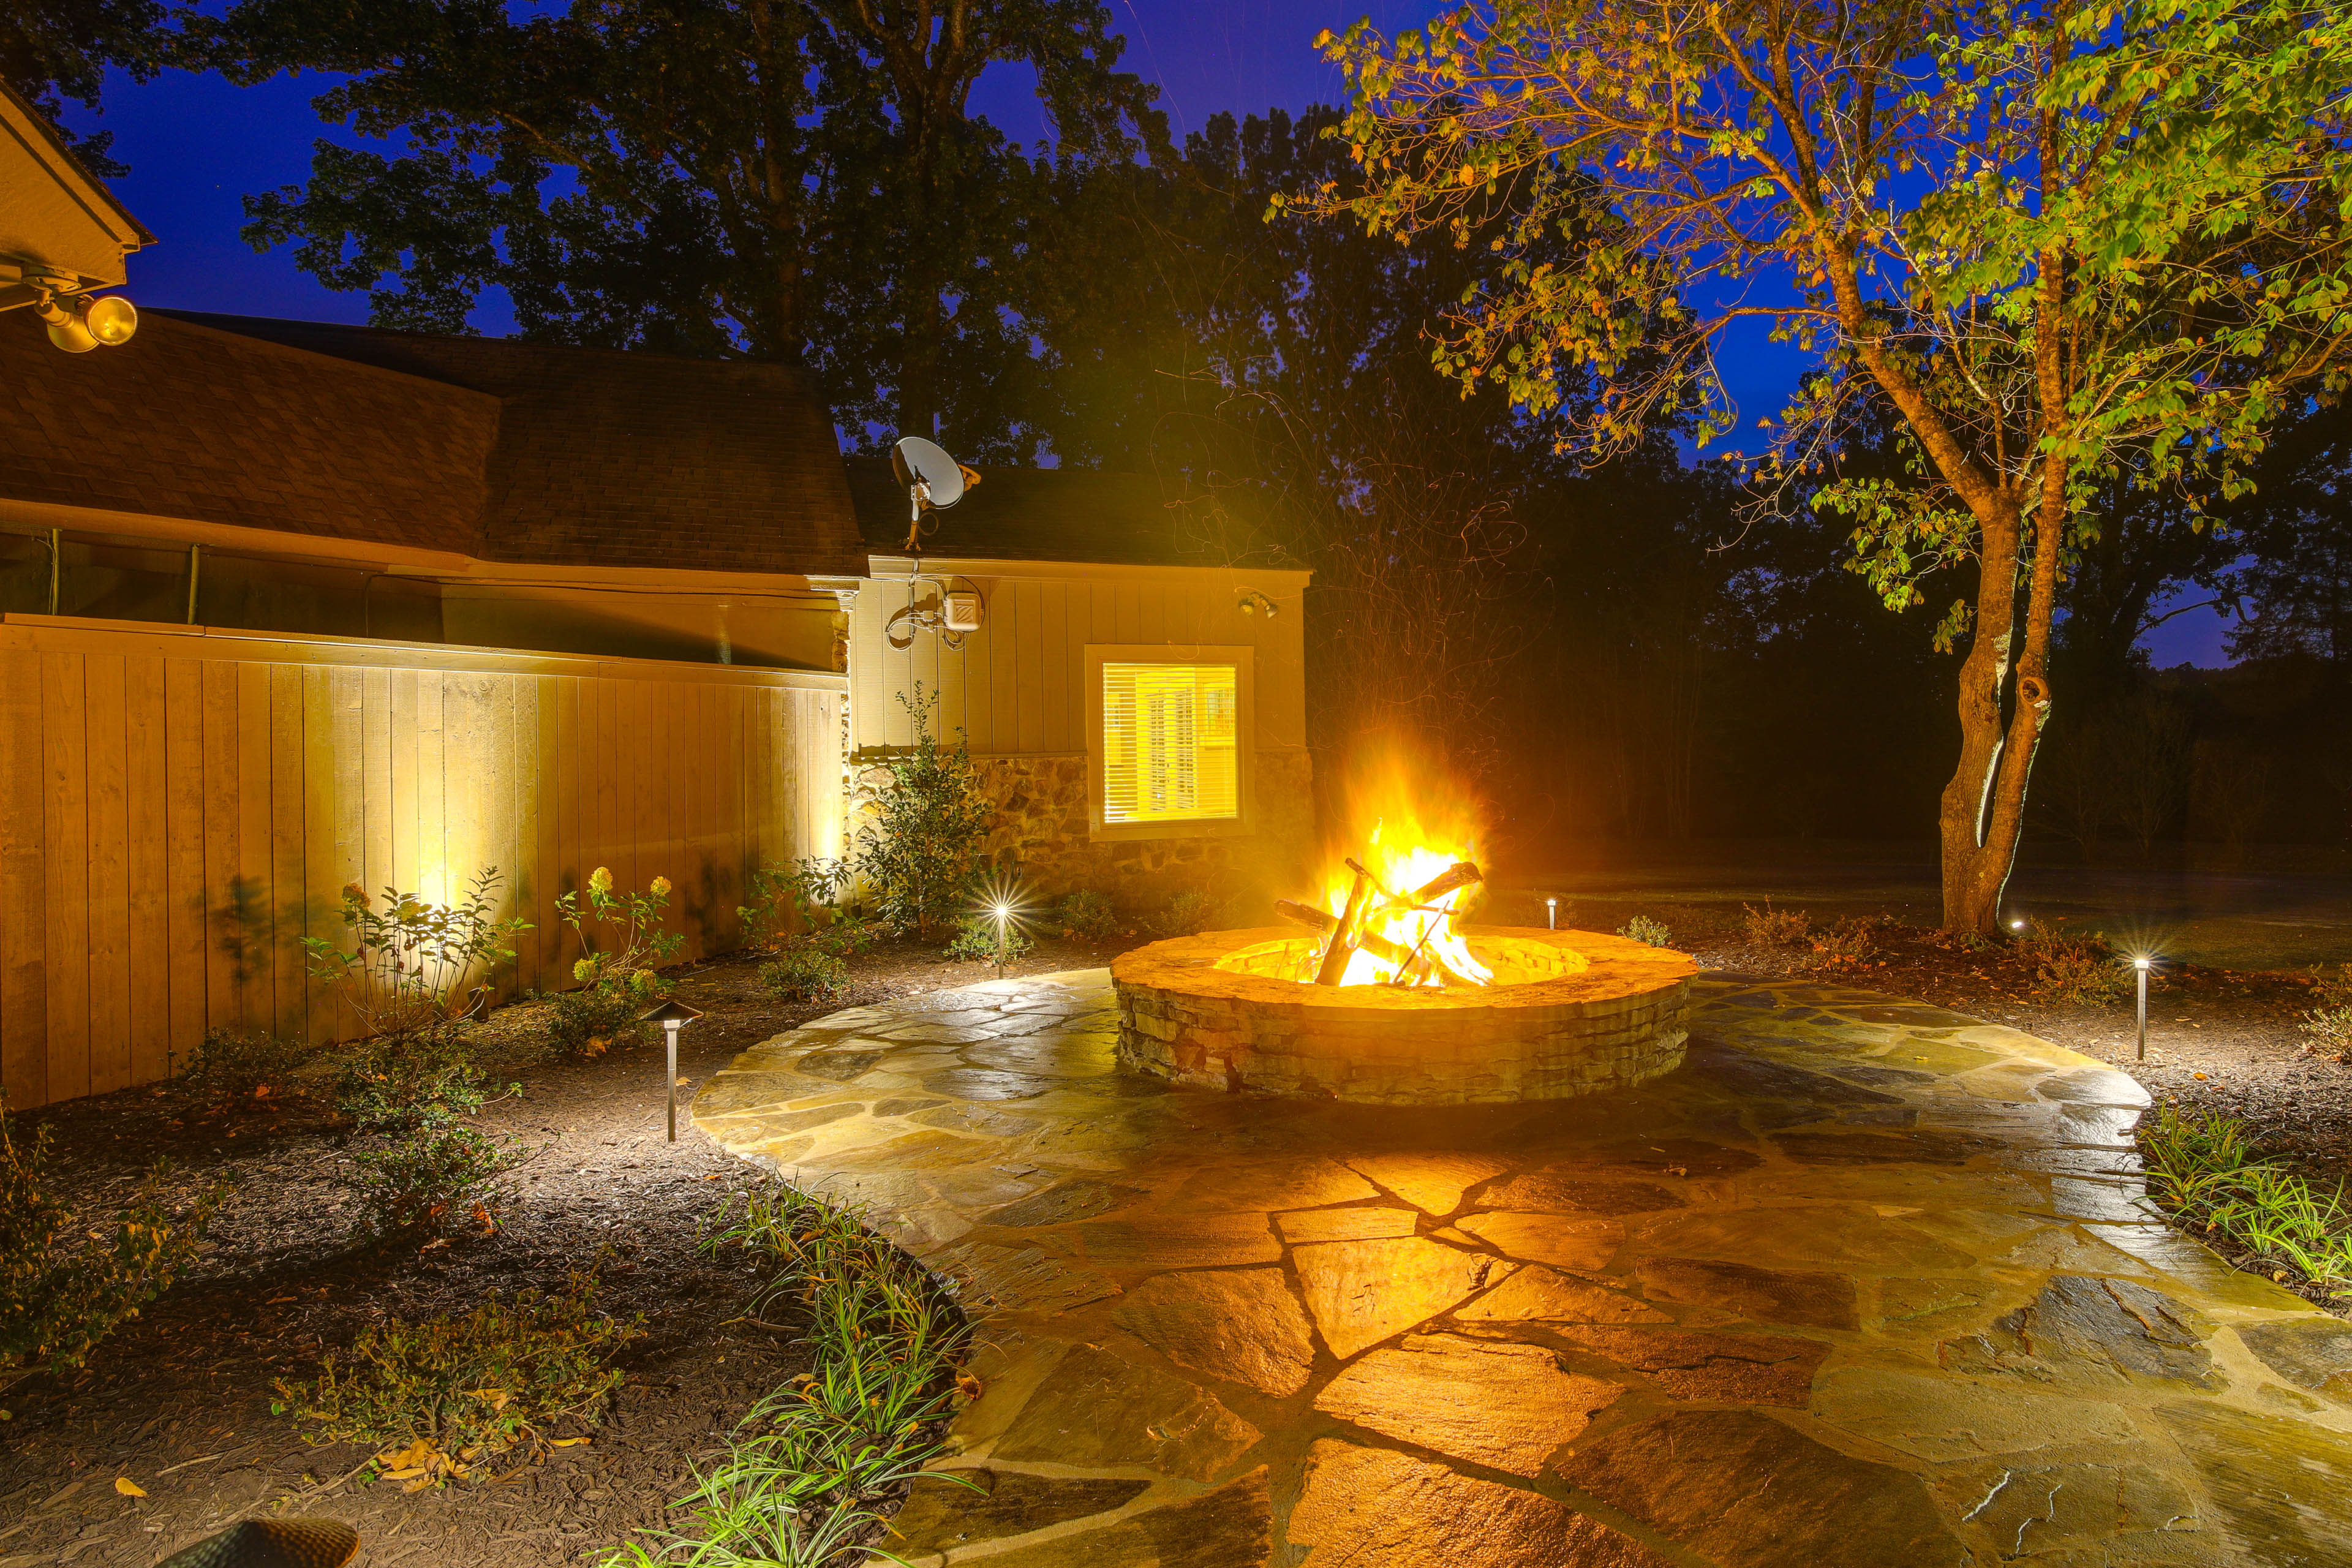 Yard Space | Fire Pit